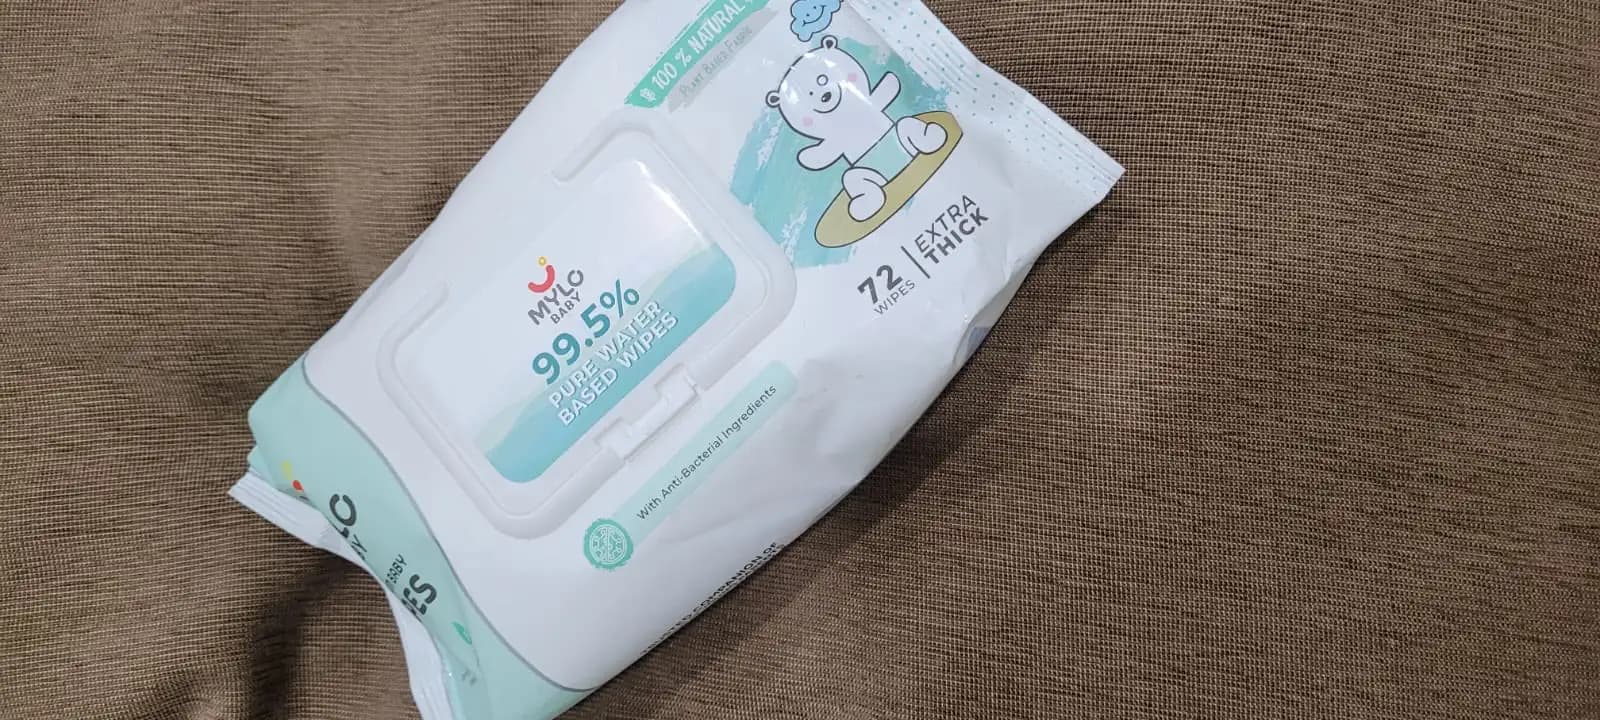 Mylo Baby 99.5% Ultra Pure Water- Based Premium Wipes with 100% Extra Thick Cotton Fabric with Lid - Pack of 2